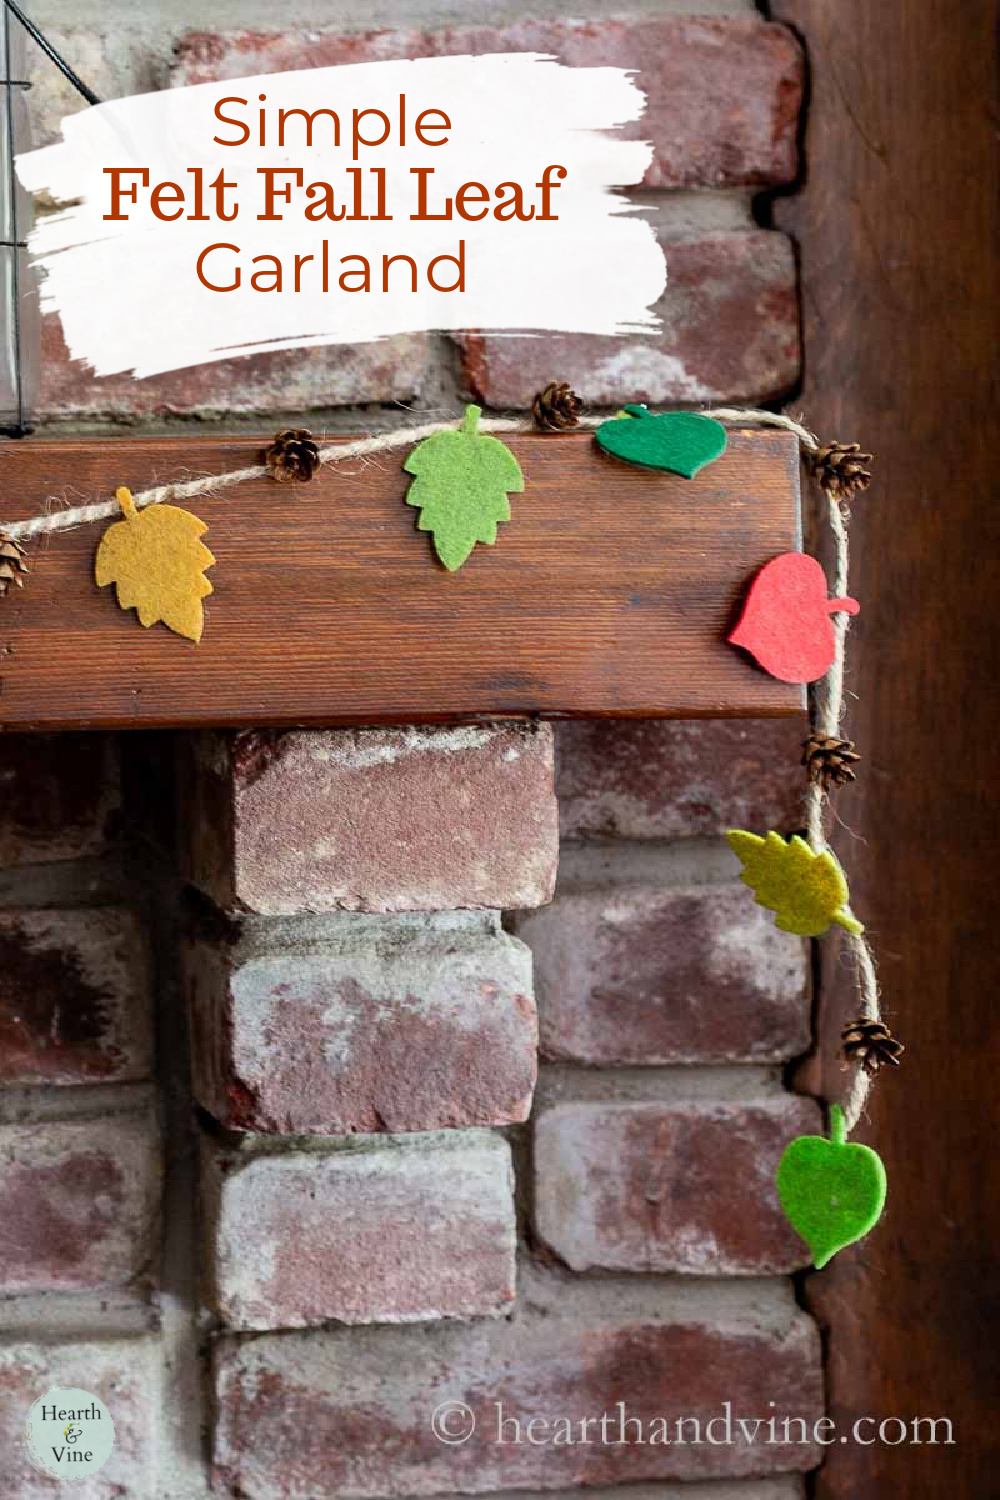 Felt leaf and pine cone garland on the corner of a mantel.